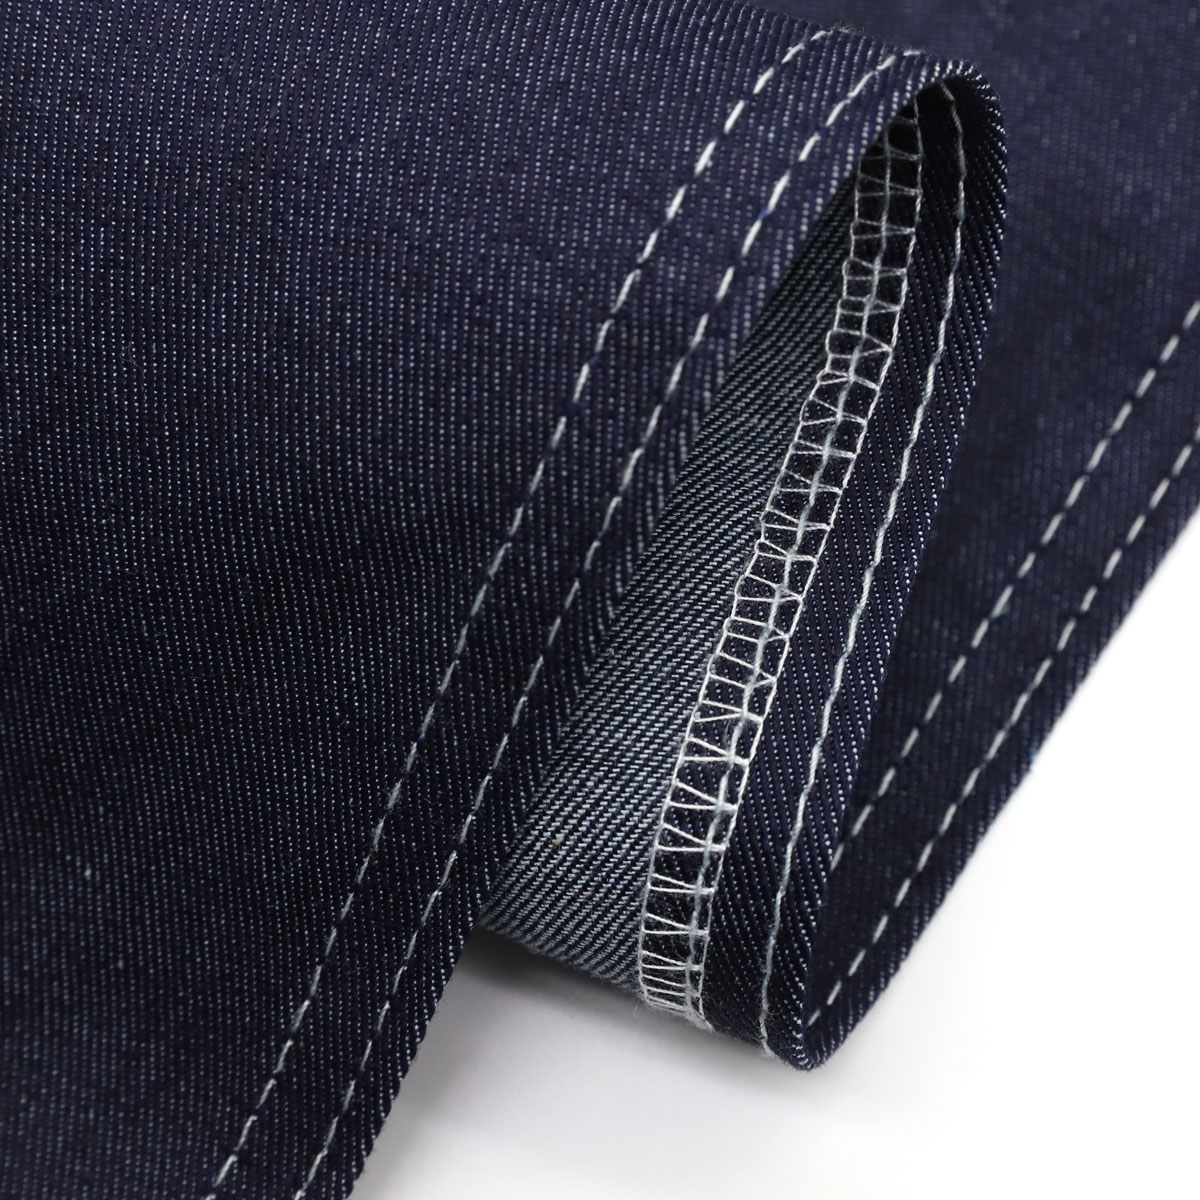 A Good Guide of High Stretch Denim Fabric How to Choose 2